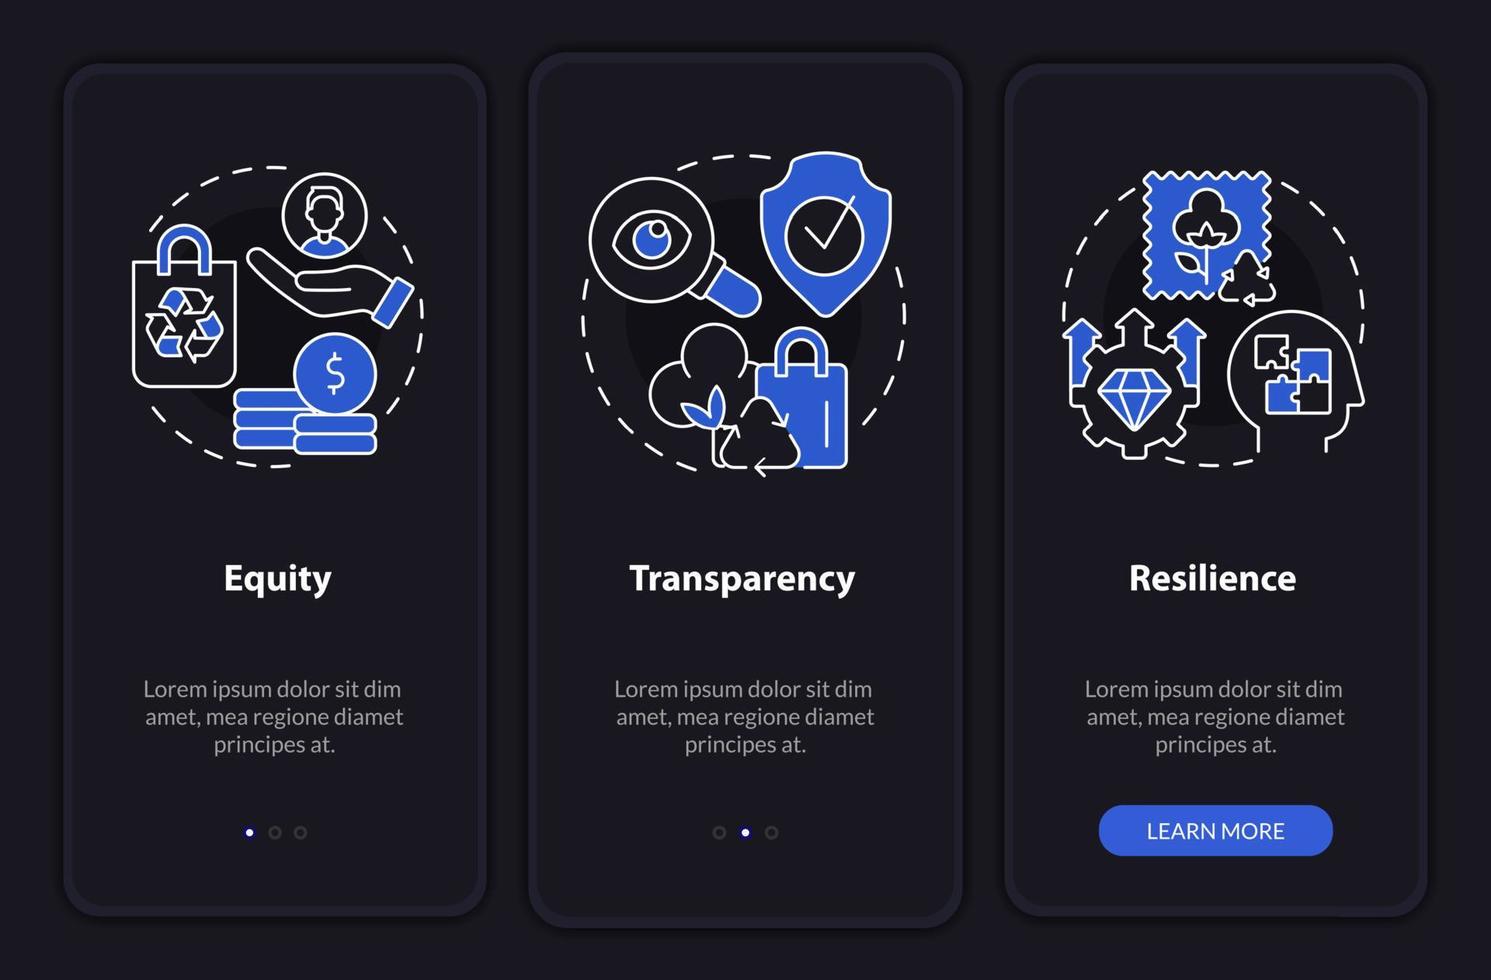 Circular economy key principles night mode onboarding mobile app screen. Walkthrough 3 steps graphic instructions pages with linear concepts. UI, UX, GUI template. vector